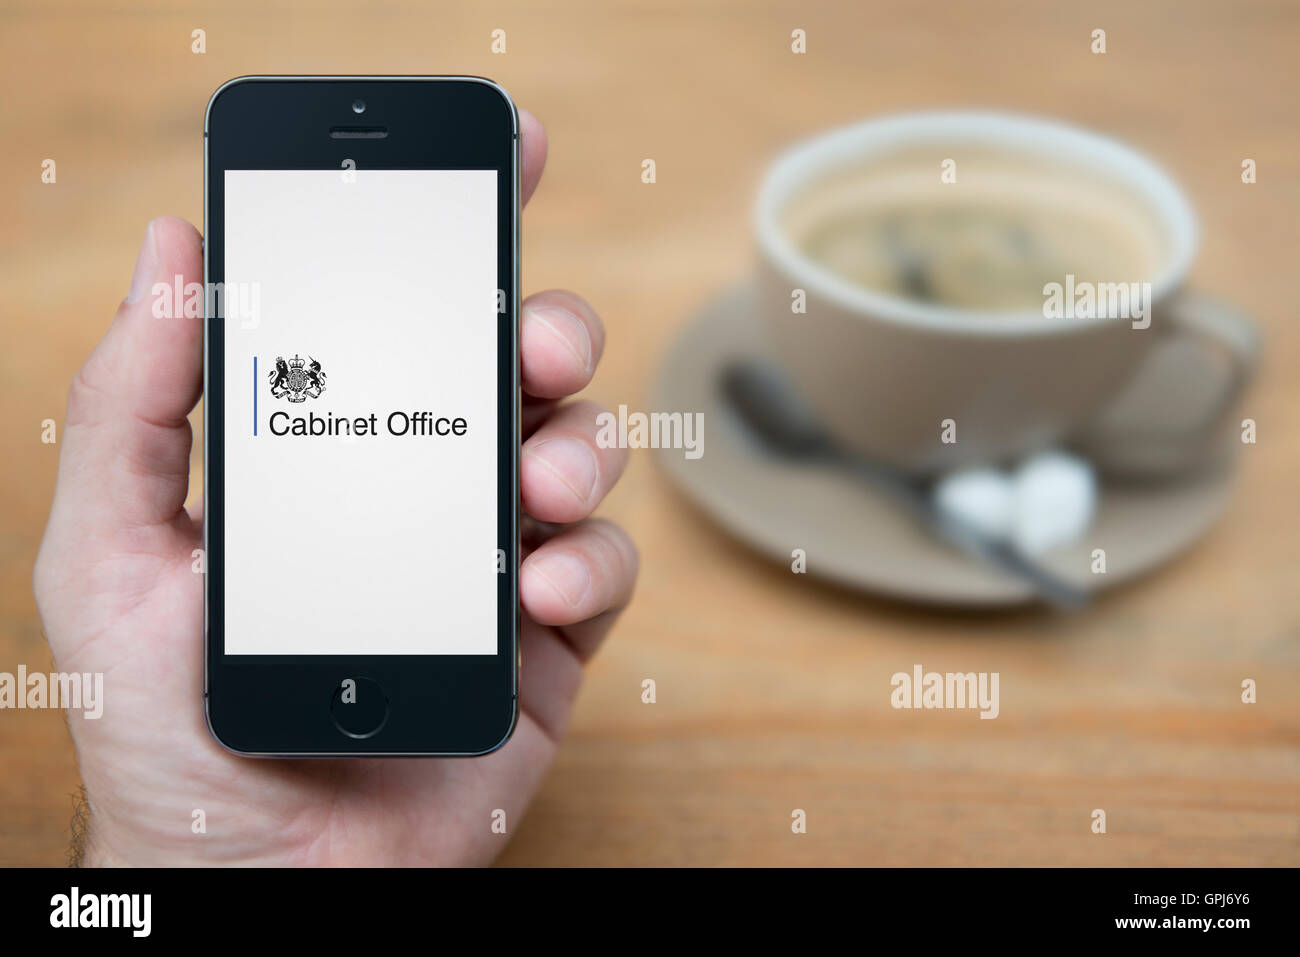 A man looks at his iPhone which displays the UK Government Cabinet Office logo, with coffee (Editorial use only). Stock Photo